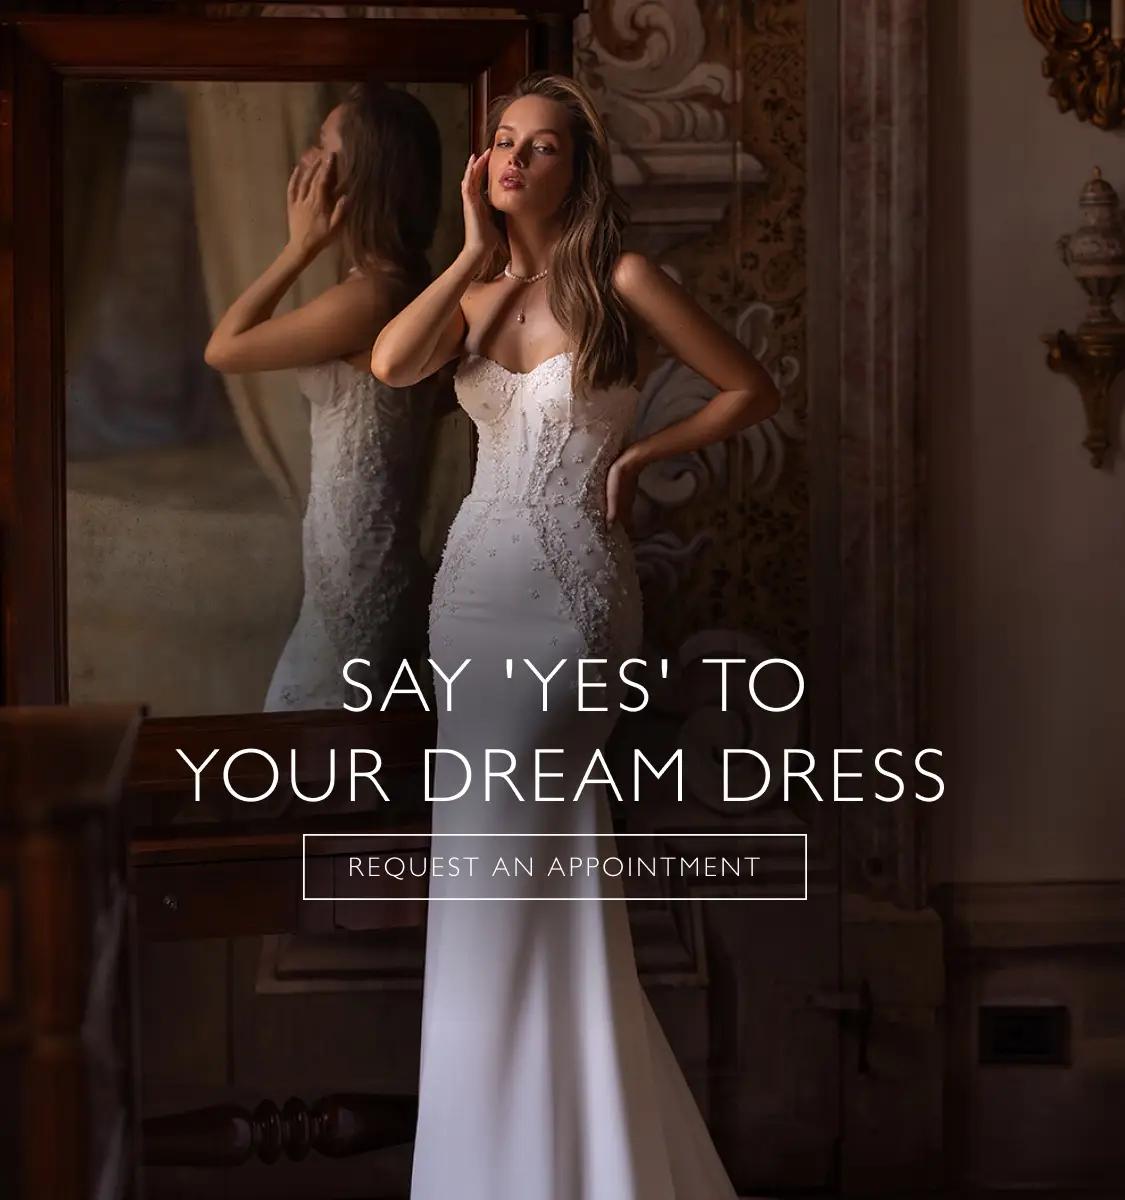 Find your dream wedding dress at XO Bridals. Mobile image.